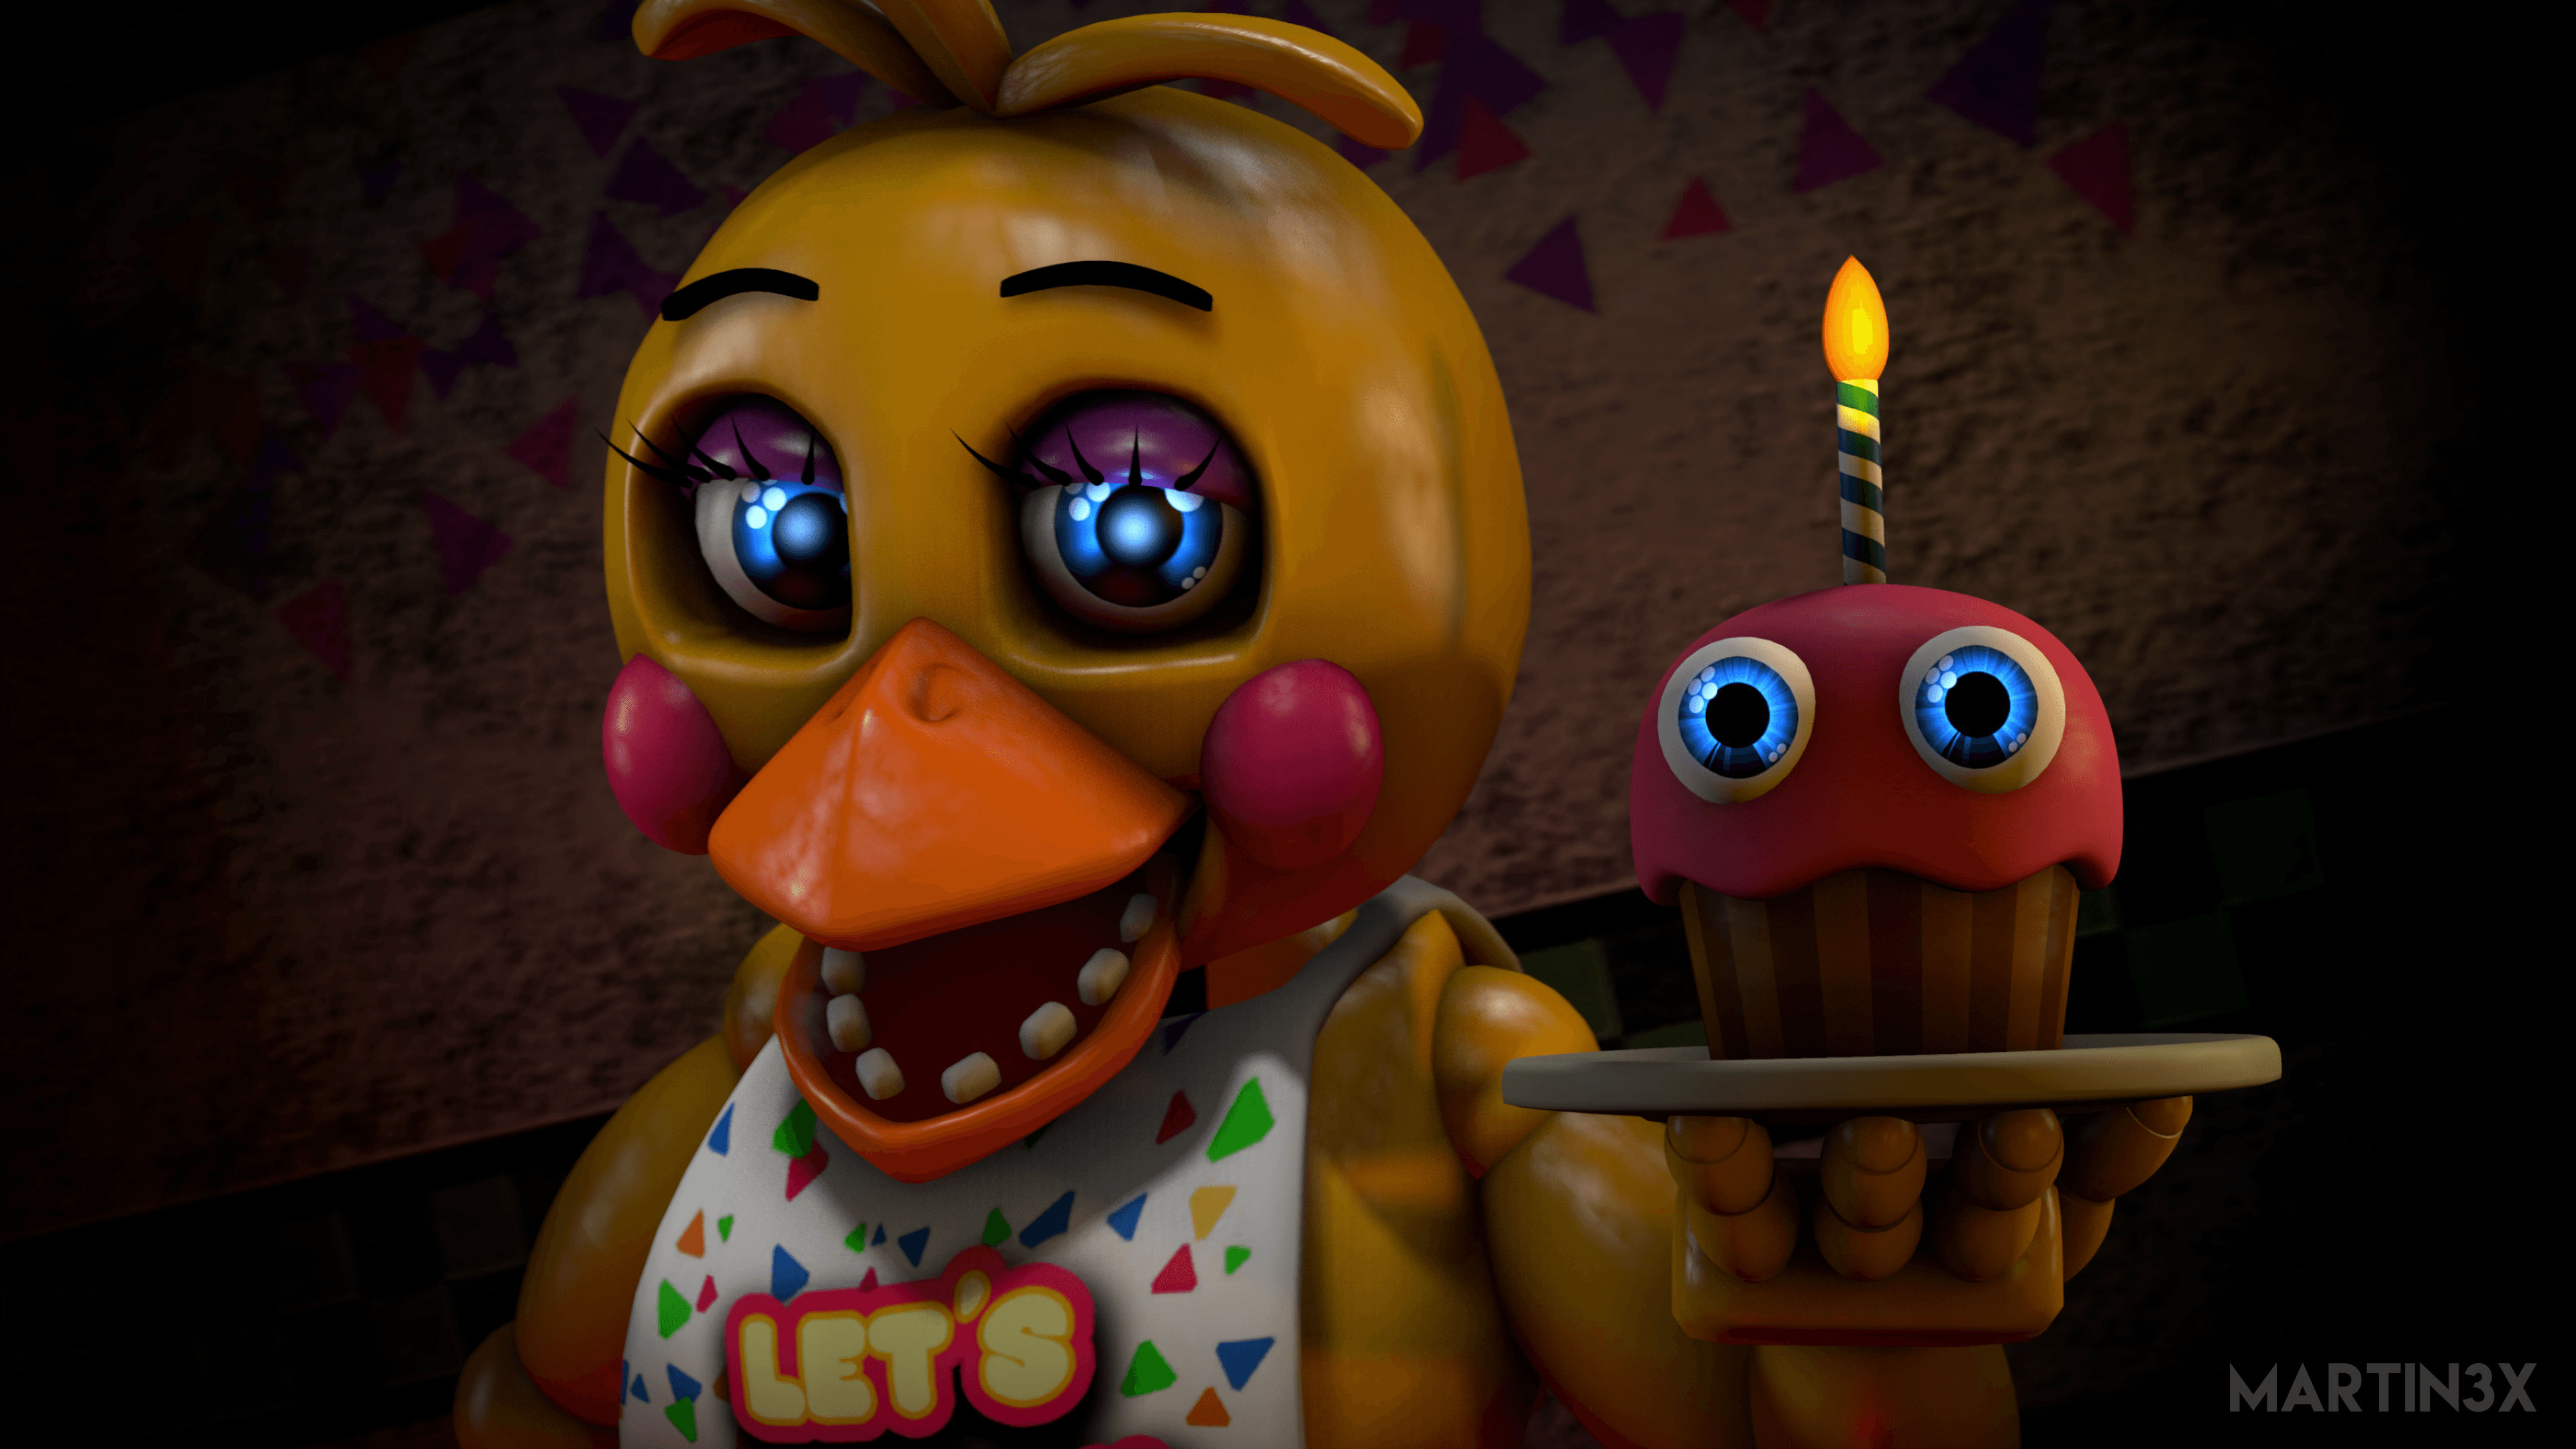 toy chica 4 by martin3x dadqsrf Nights at Freddy's Photo